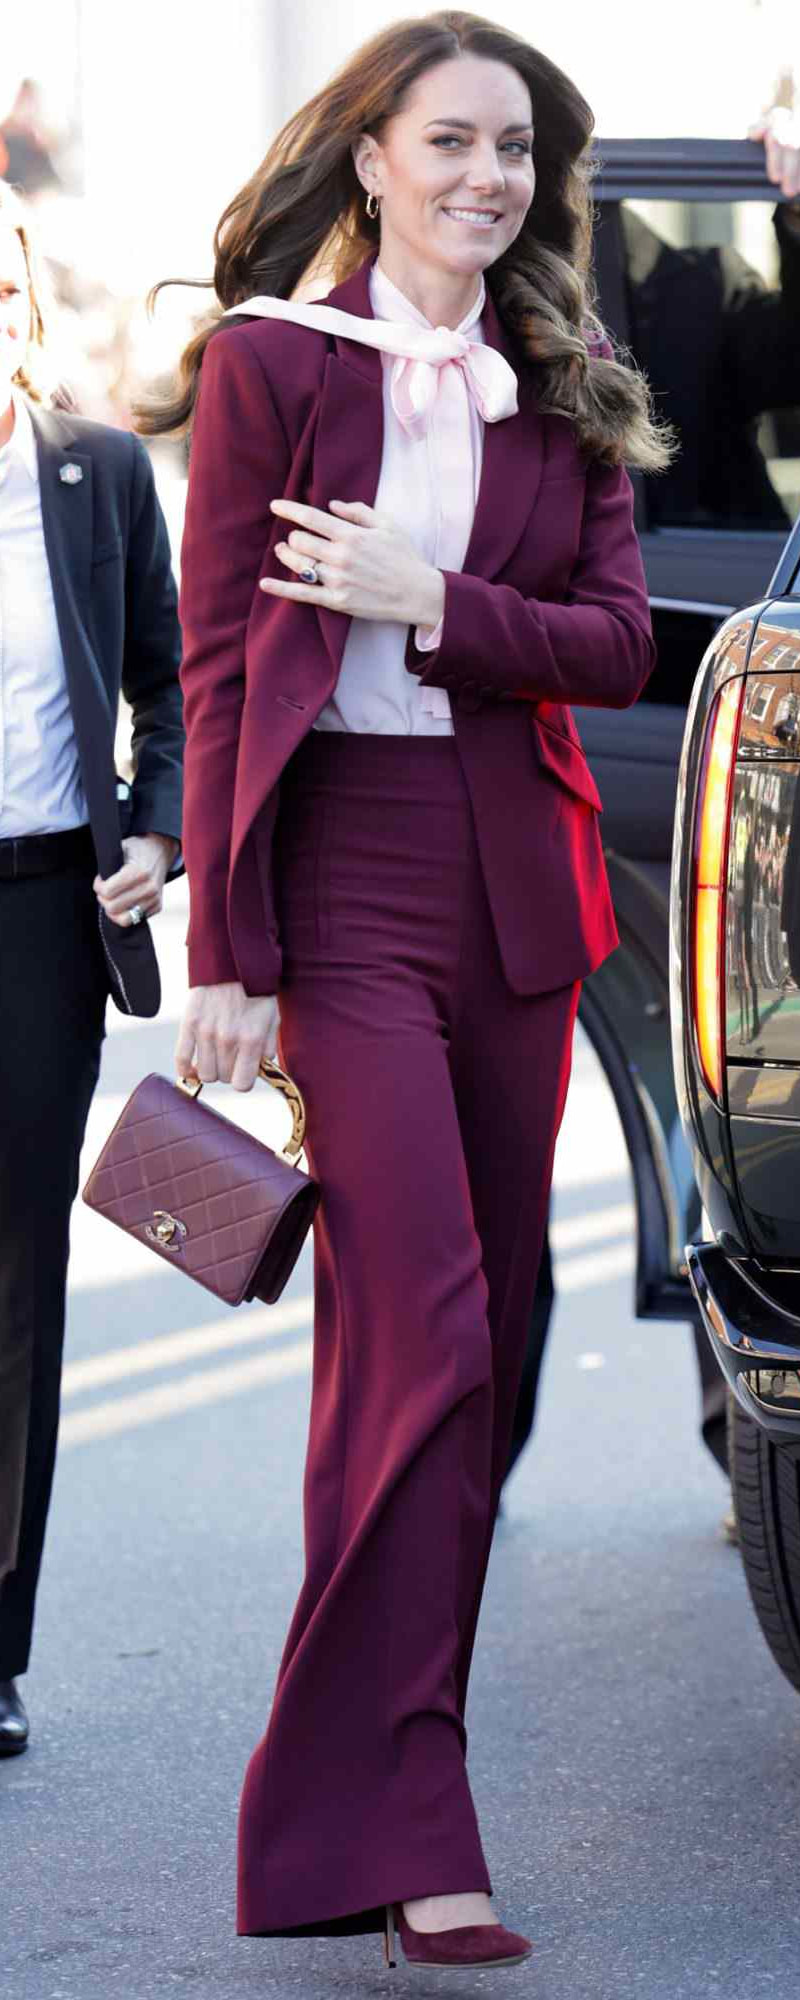 Burberry Silk Crepe de Chine Tie-Neck Blouse in Pink as seen on Kate Middleton, Princess of Wales.